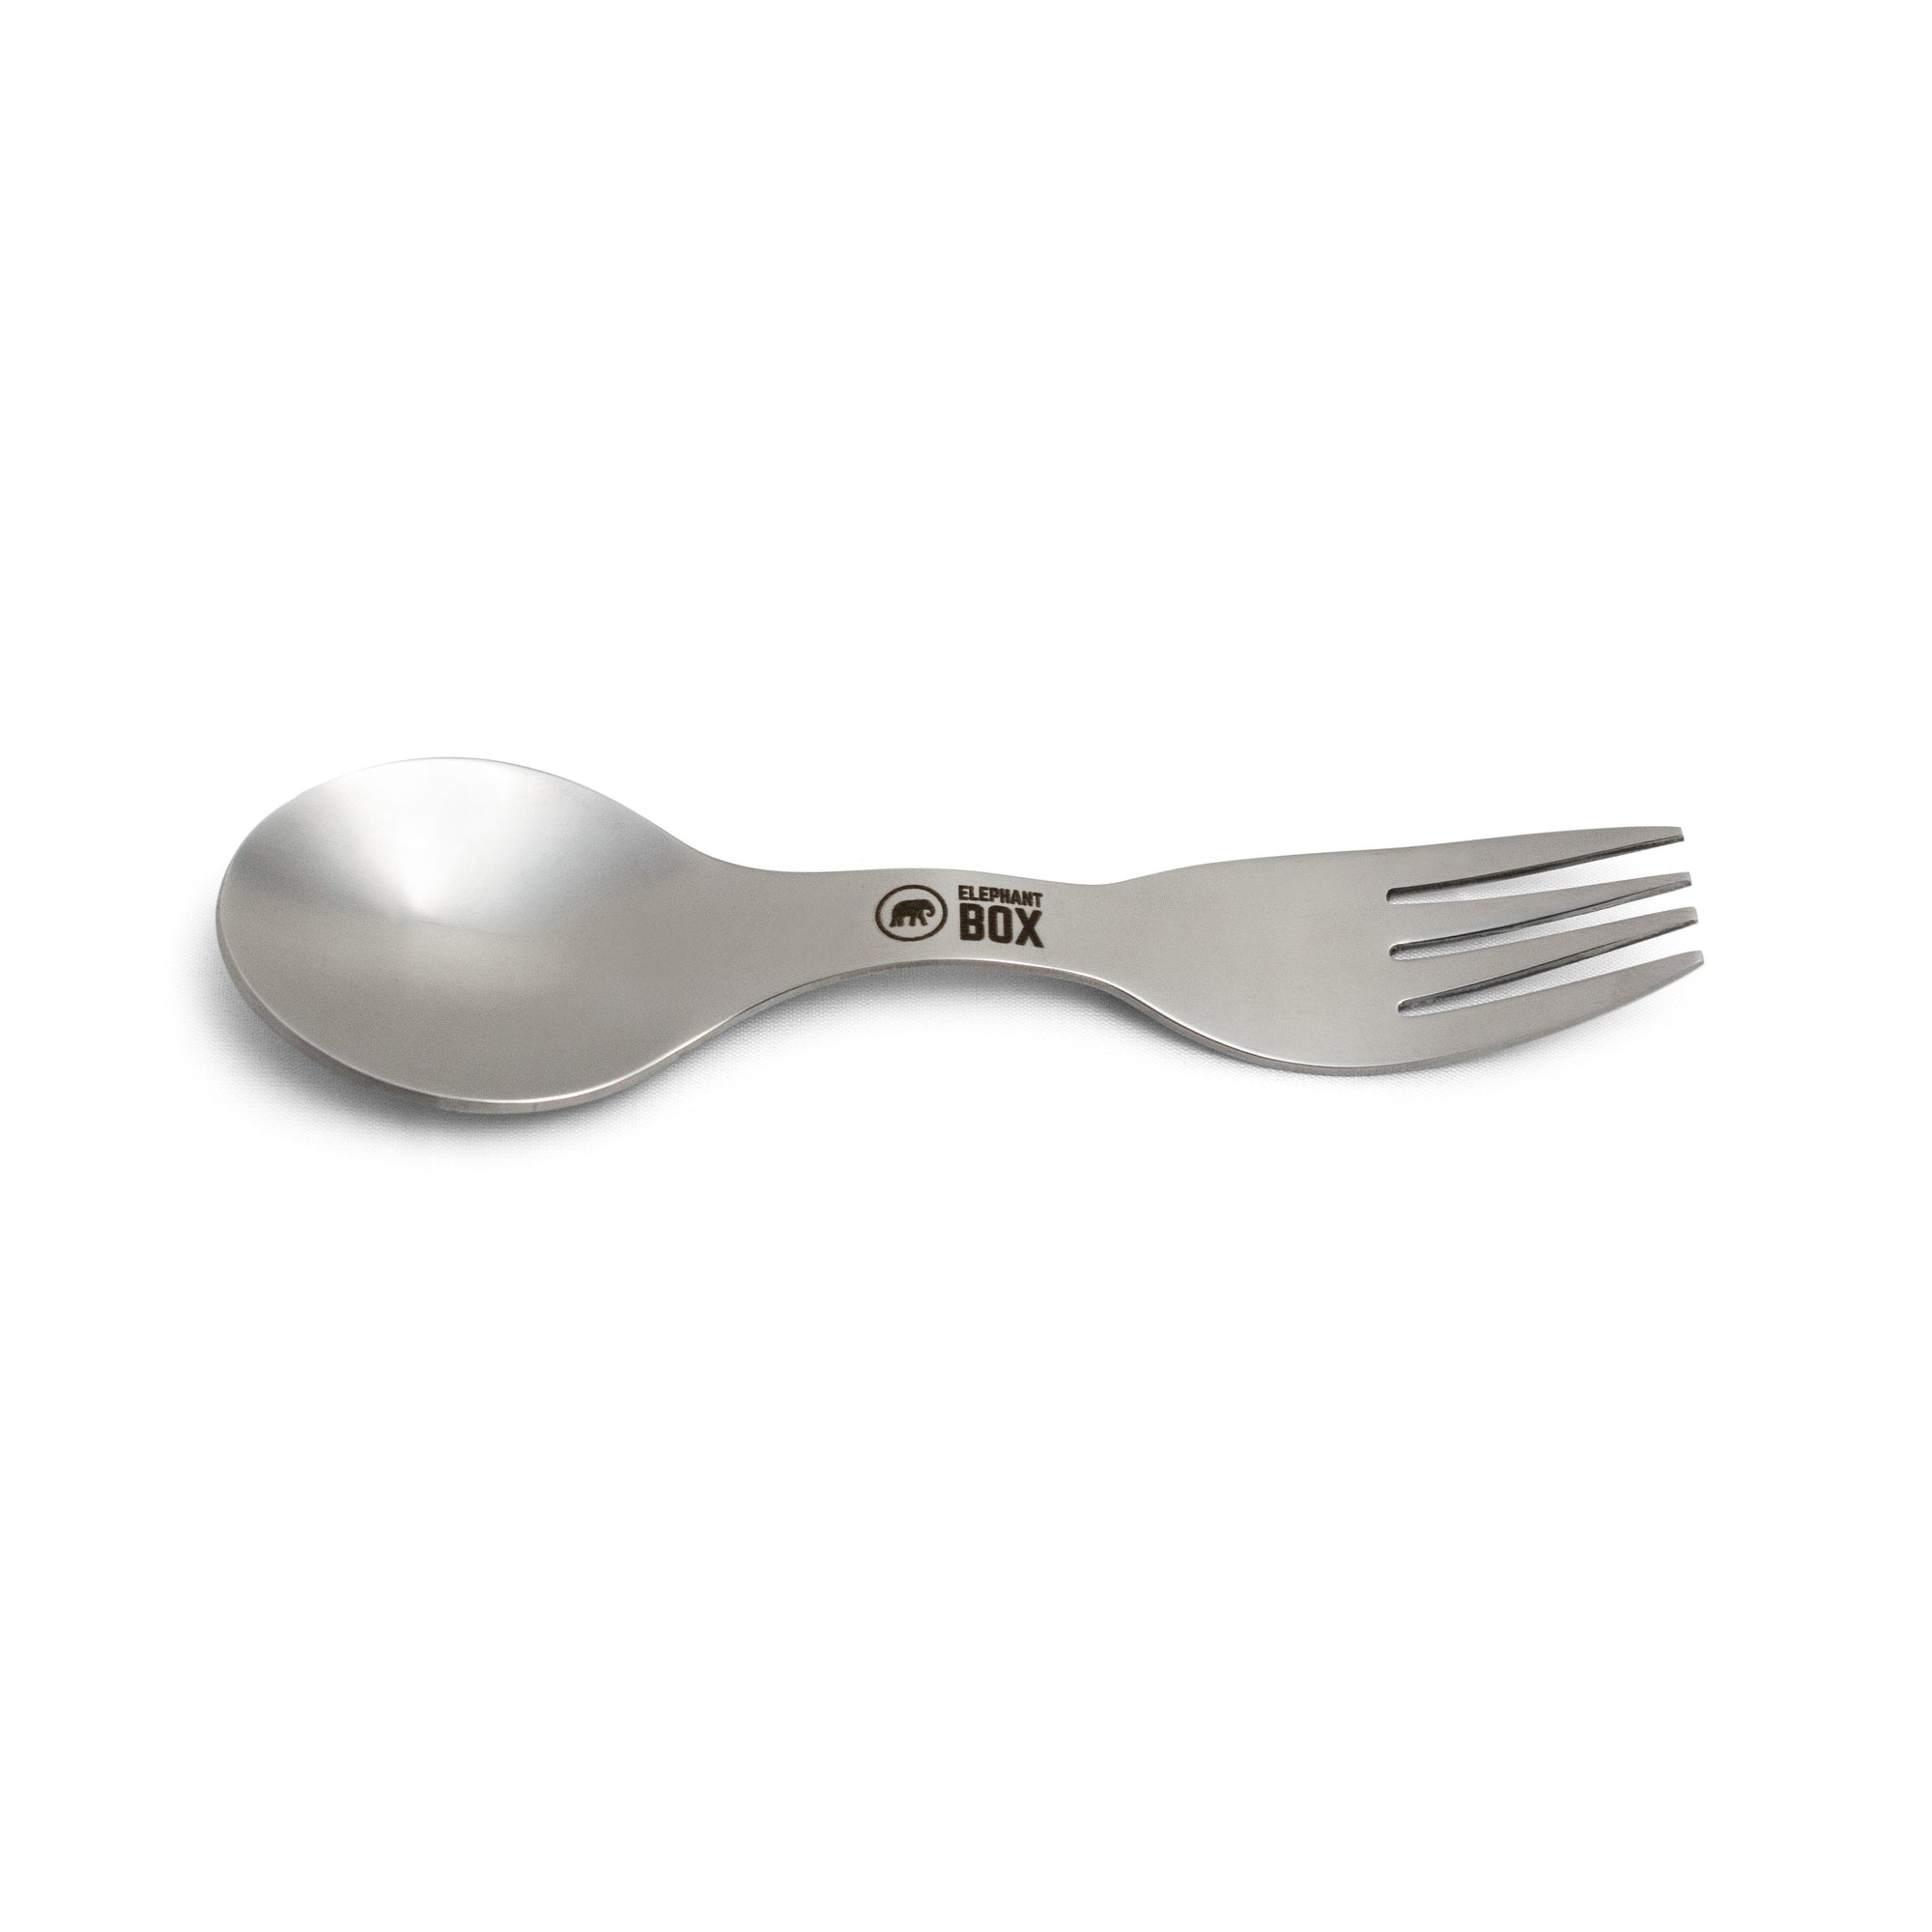 Stainless Steel Spork With Black Elephant Box Logo Embossed in Centre